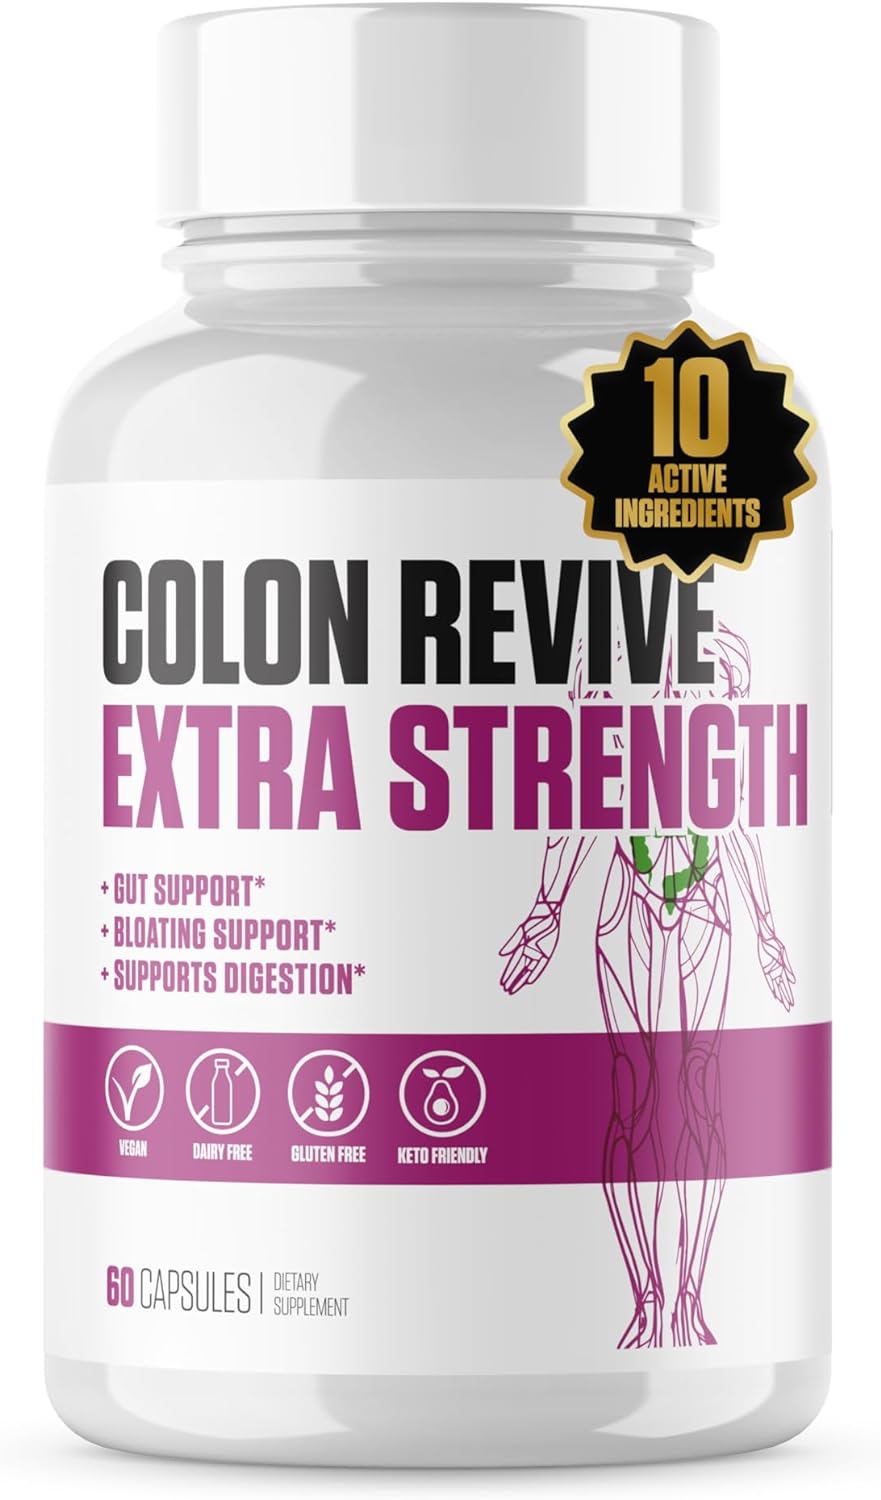 Colon Revive Extra Strength | #1 Rated Colon Cleanse  Detox Supplement | Digestive Support, Reduce Bloating, Constipation Relief W/Buckthron, Alfalfa, Aloe Vera + More For Men  Women - 60 Pills